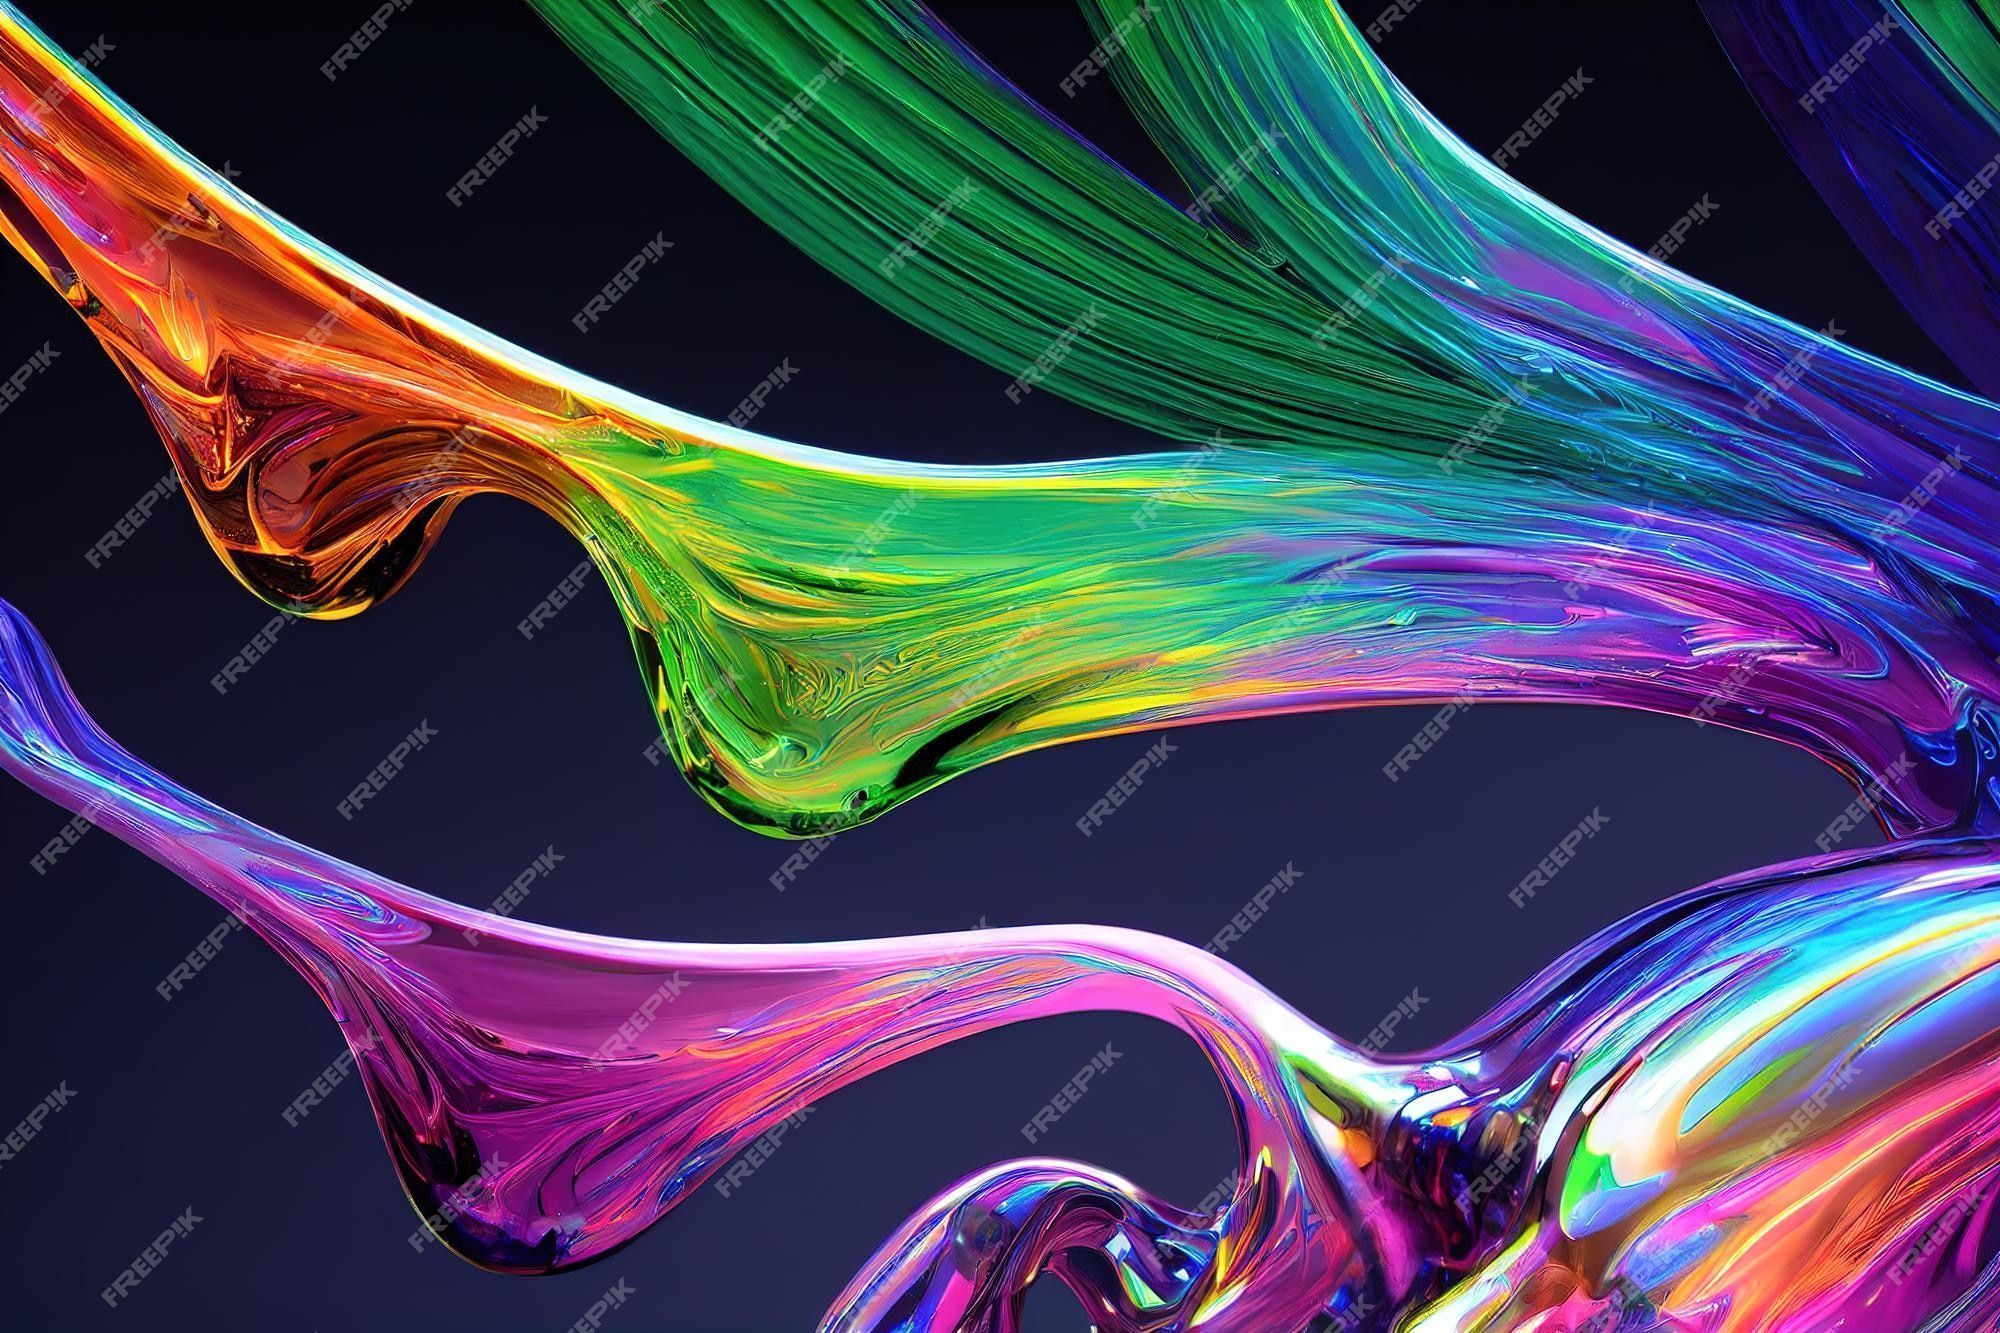 3d illustration of multicolored abstract waves of paint on a black background - Iridescent